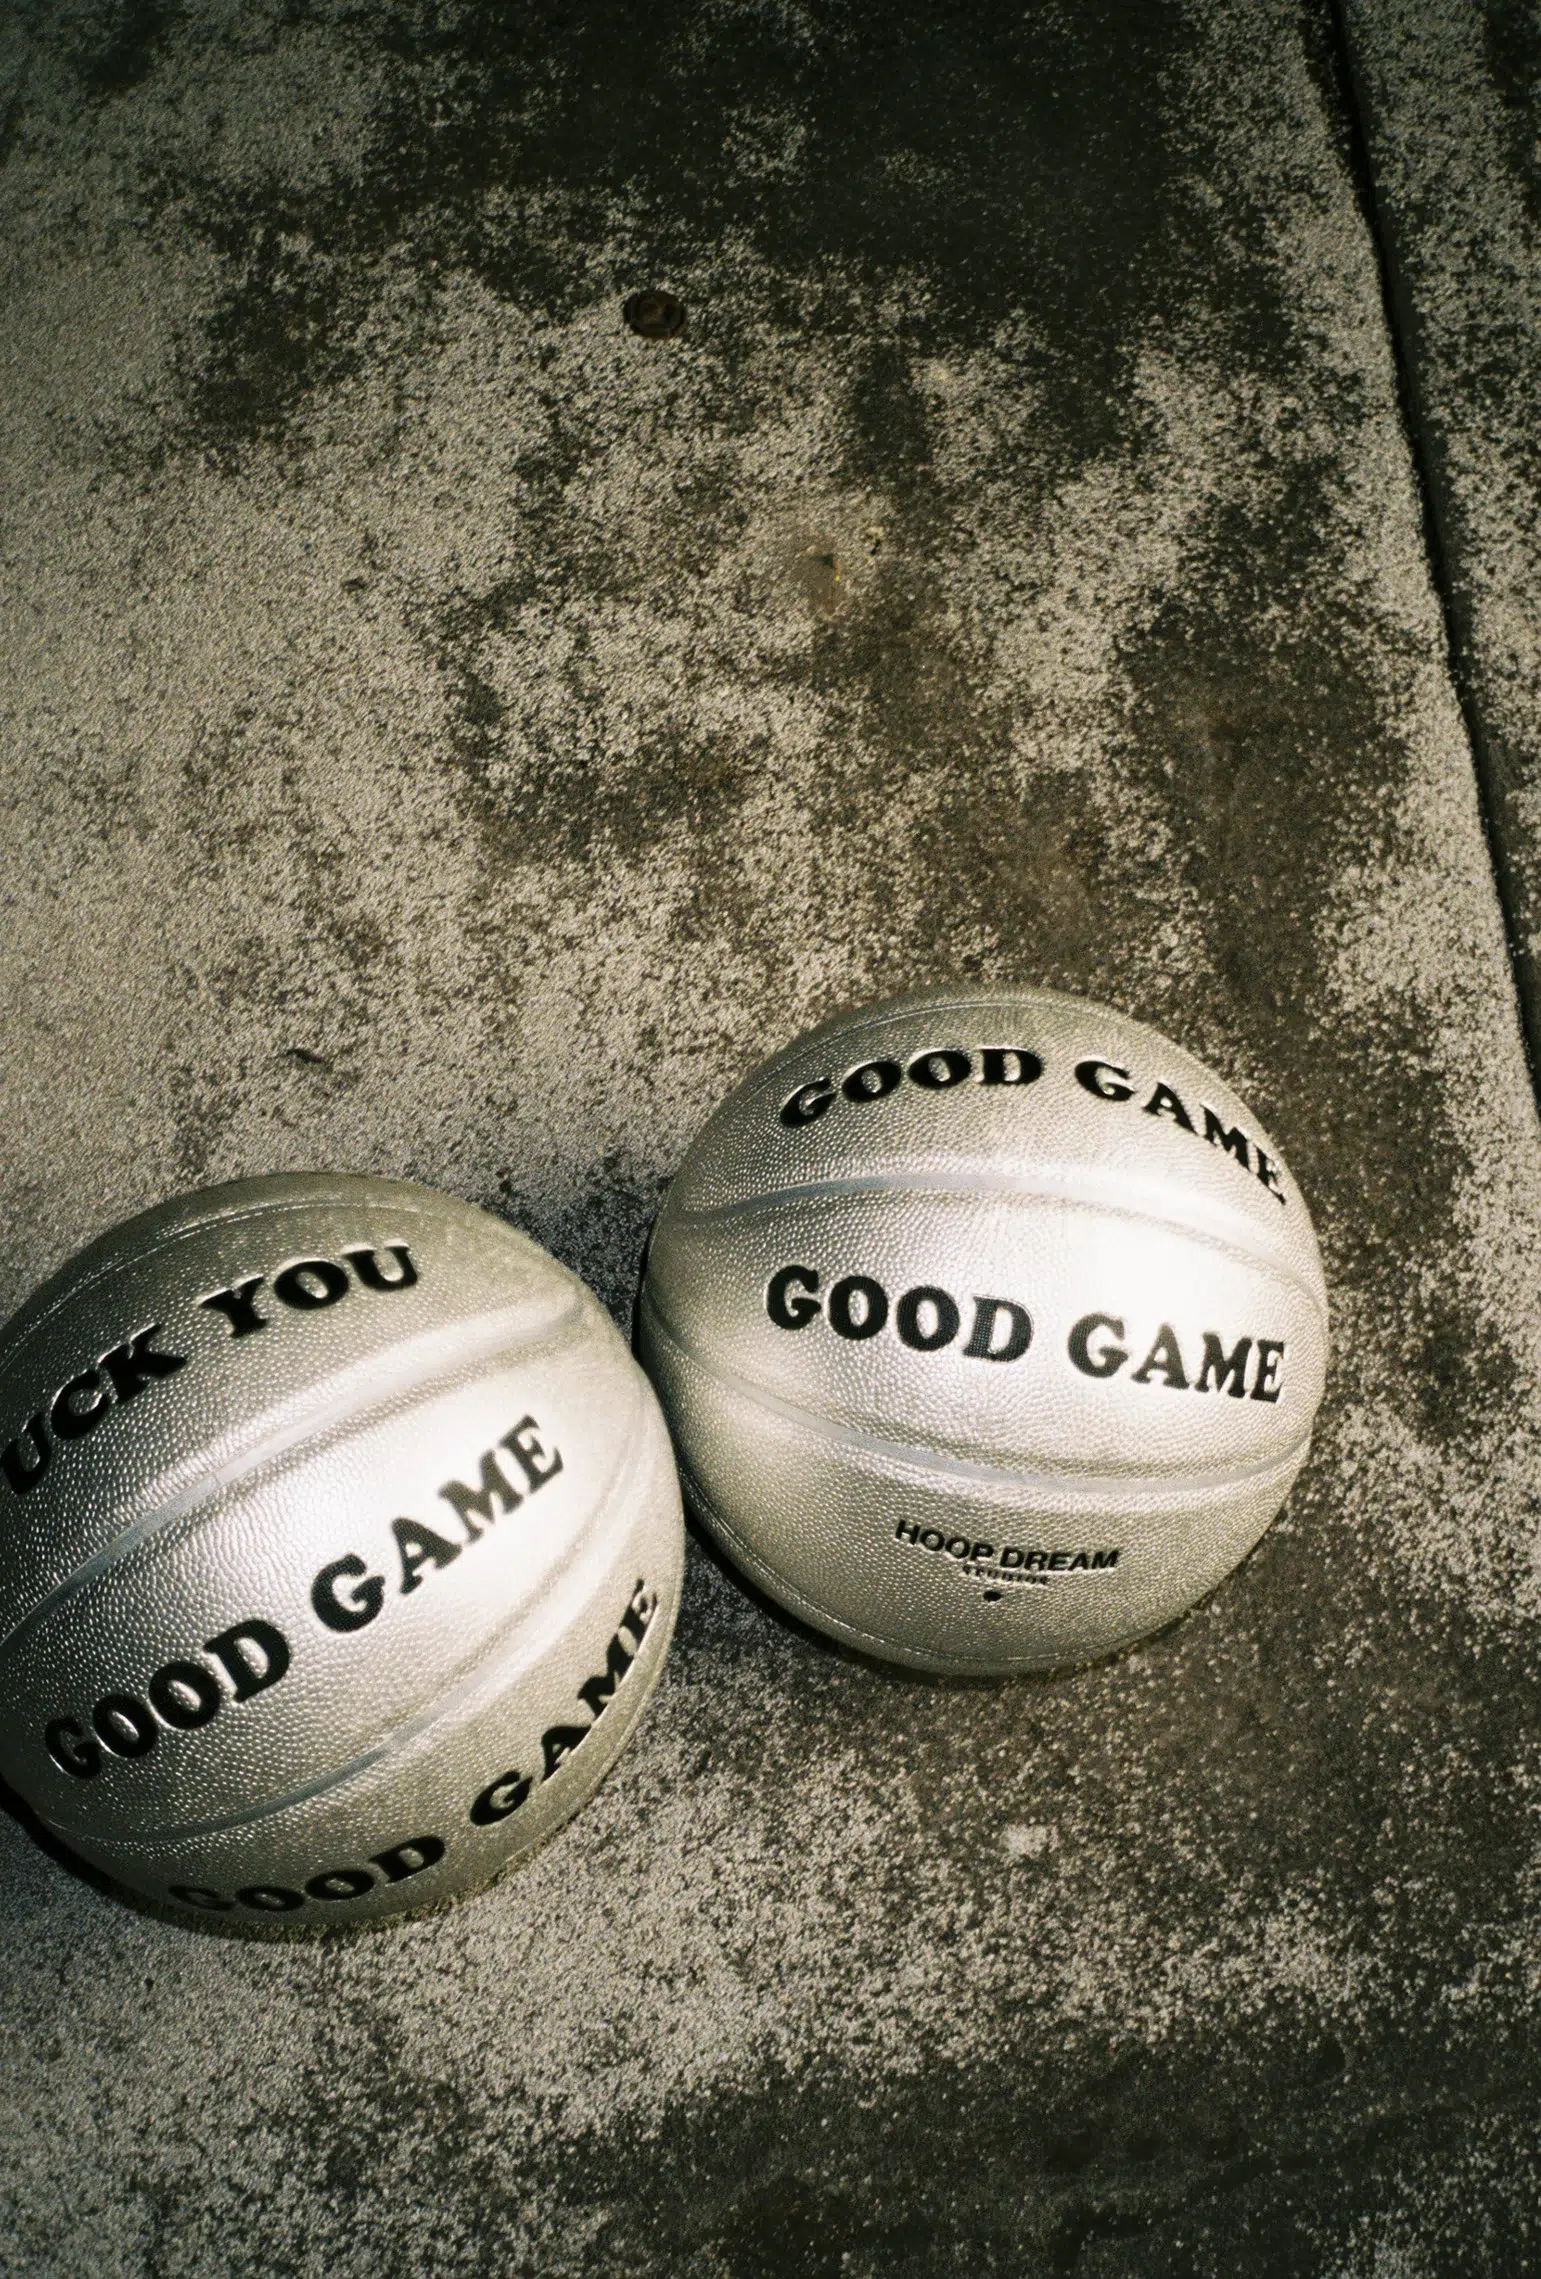 Two silver basketballs engaging in a good game on a concrete floor.